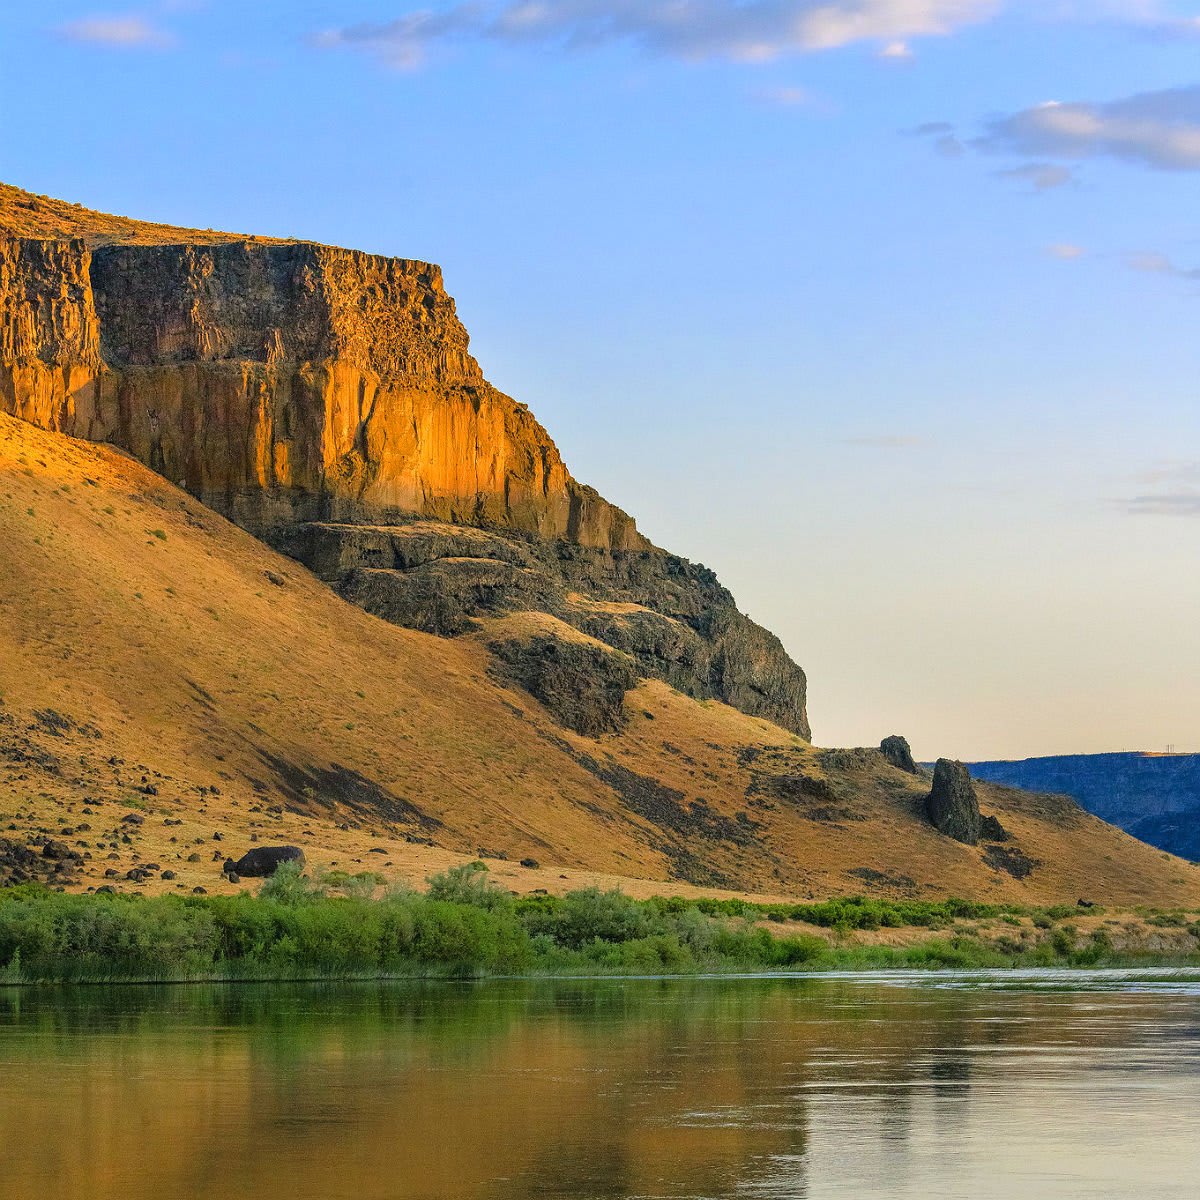 An incredible destination for outdoor recreation, more than 300,000 anglers, campers, hikers, boaters & birders visit the South Fork of the Snake River each year